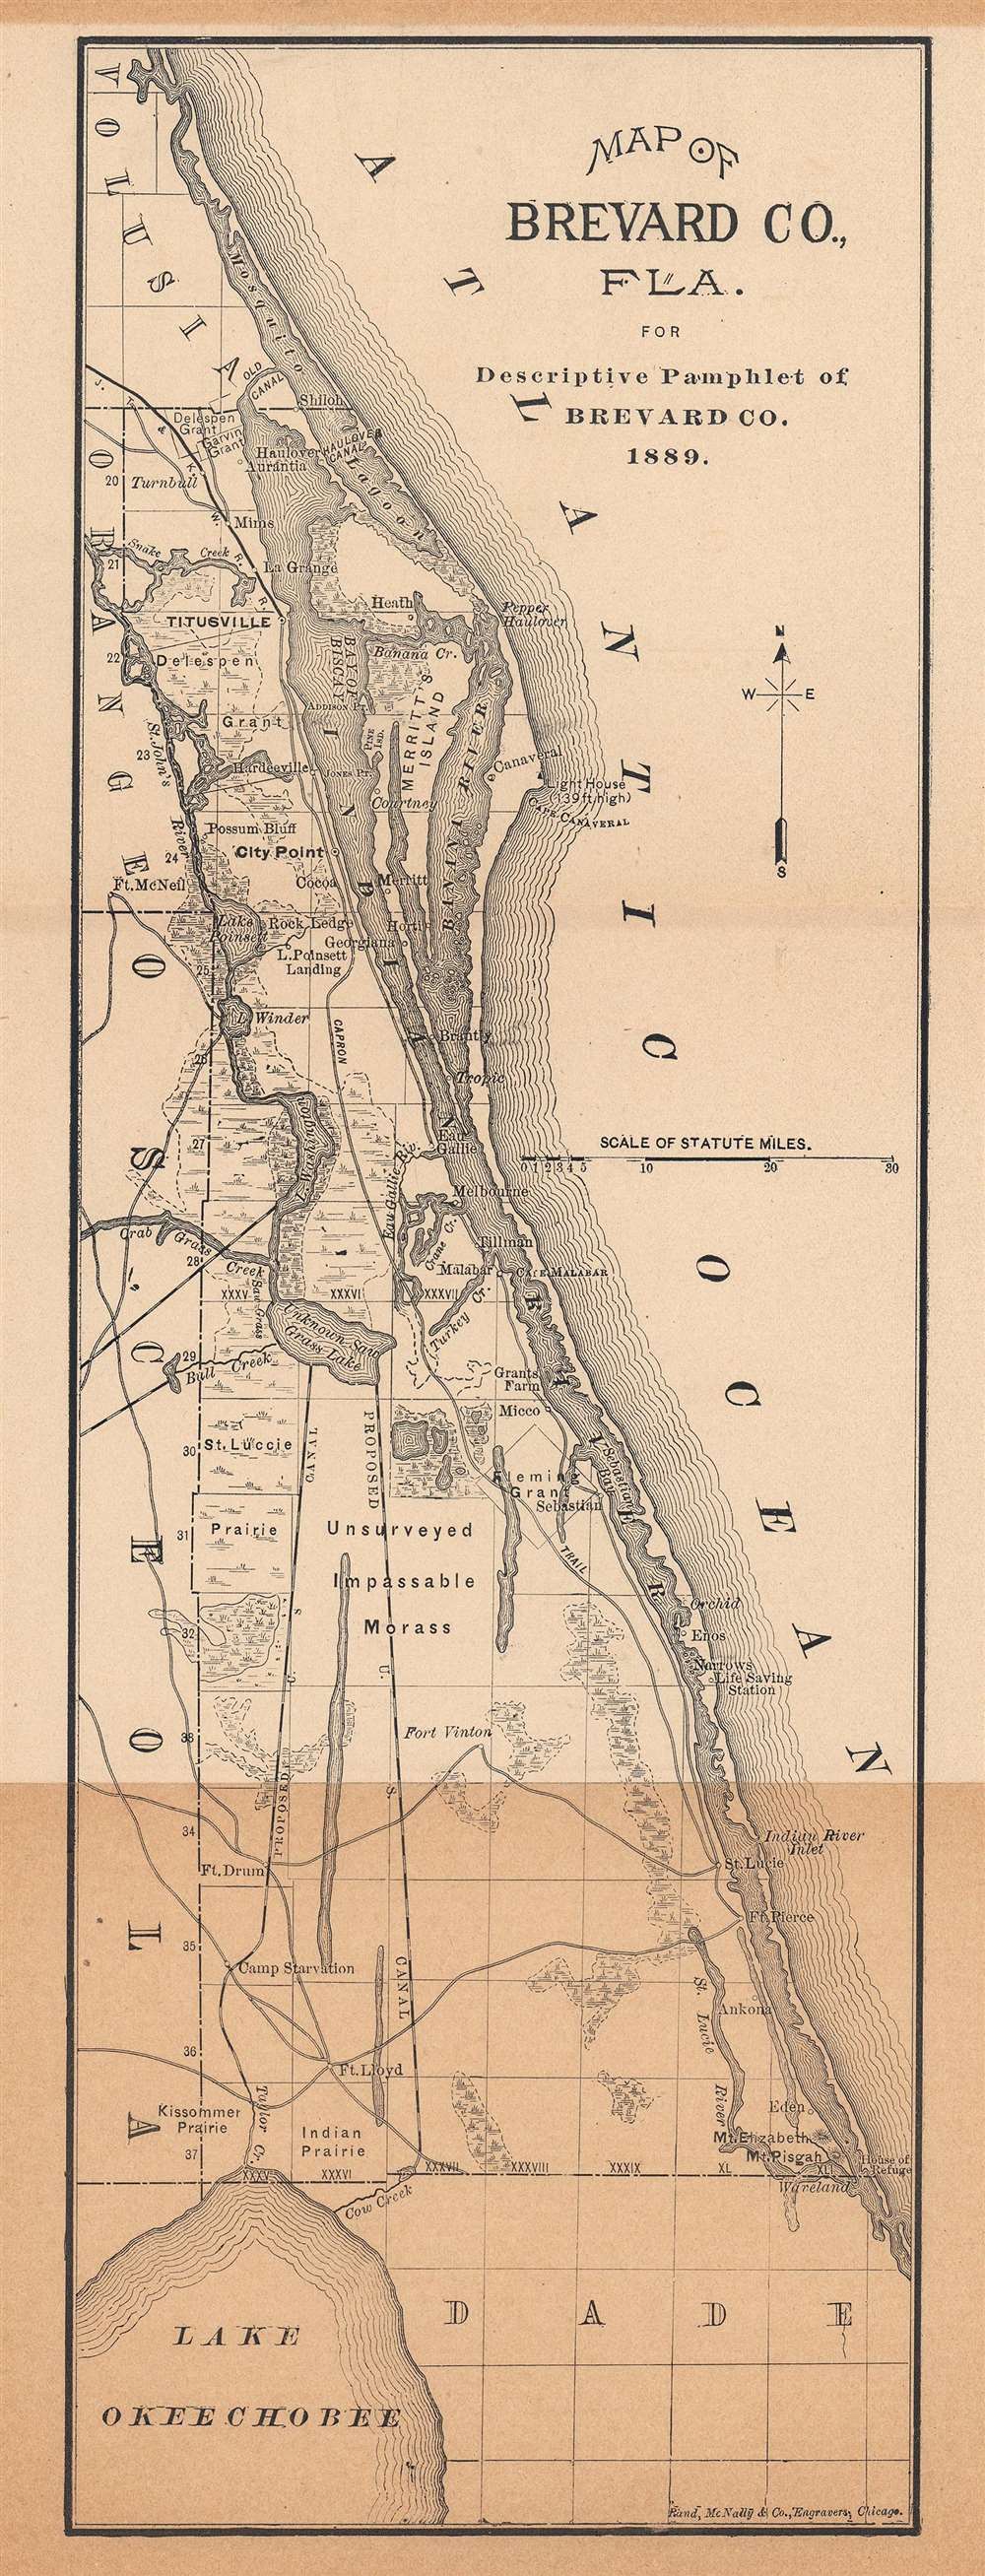 Map of Brevard Co., Fla. for Descriptive Pamphlet of Brevard Co. - Main View